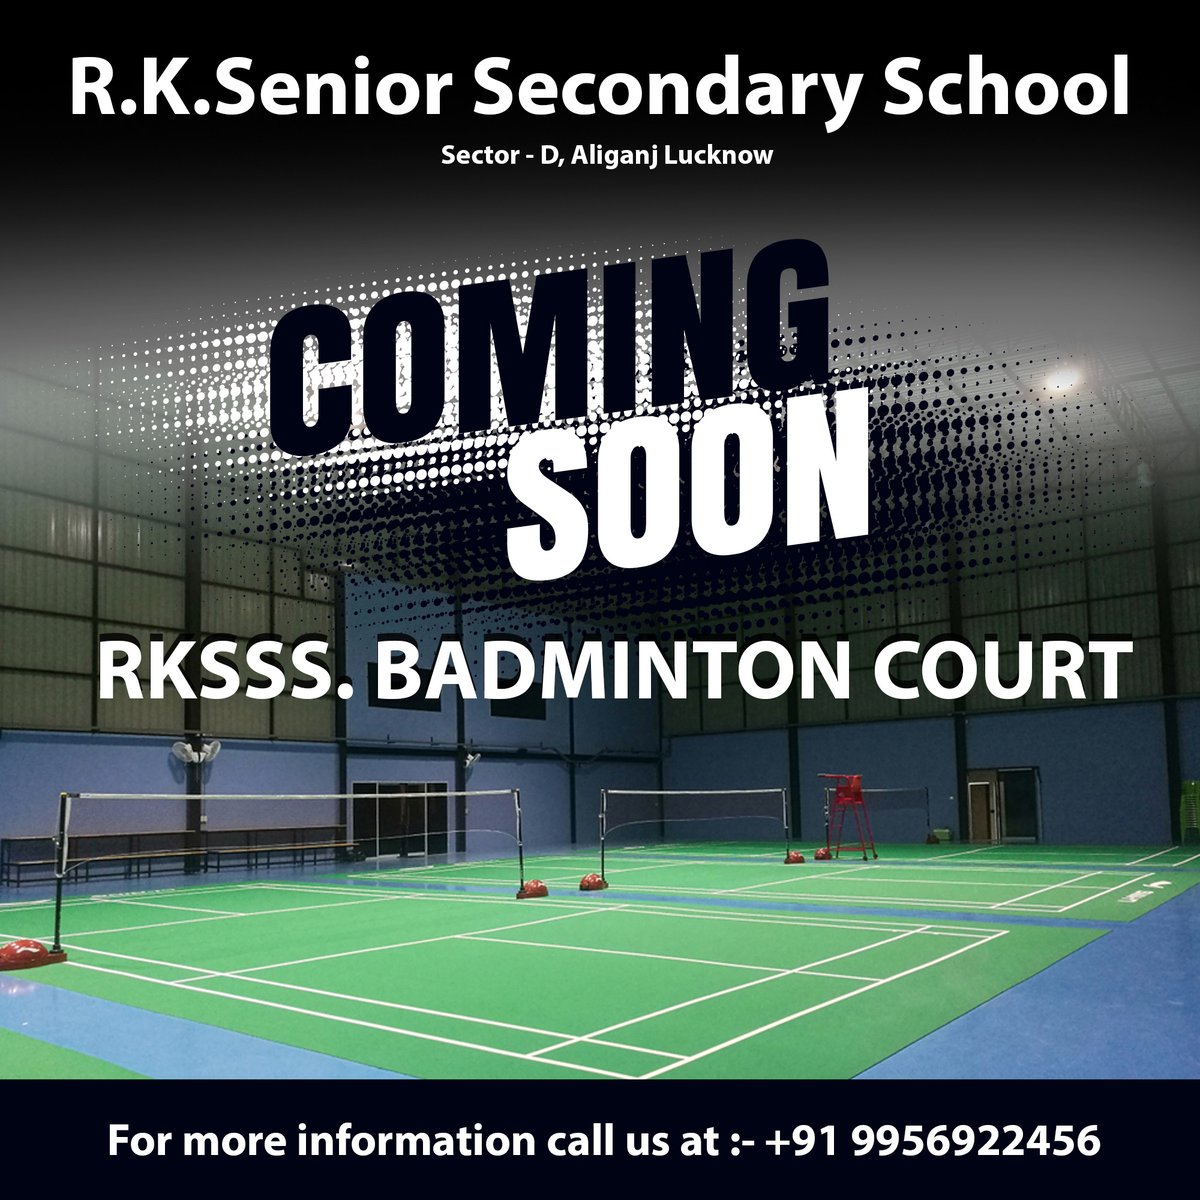 RKSSS. BADMINTON COURT 🏸
COMING SOON
At R K Senior Secondary School,aliganj, Lucknow

#admissionopen2024_2025 #student
#badminton #sport #badmintoncourt #schoollife #summervacation2024

For more information call us at +91 9956922456